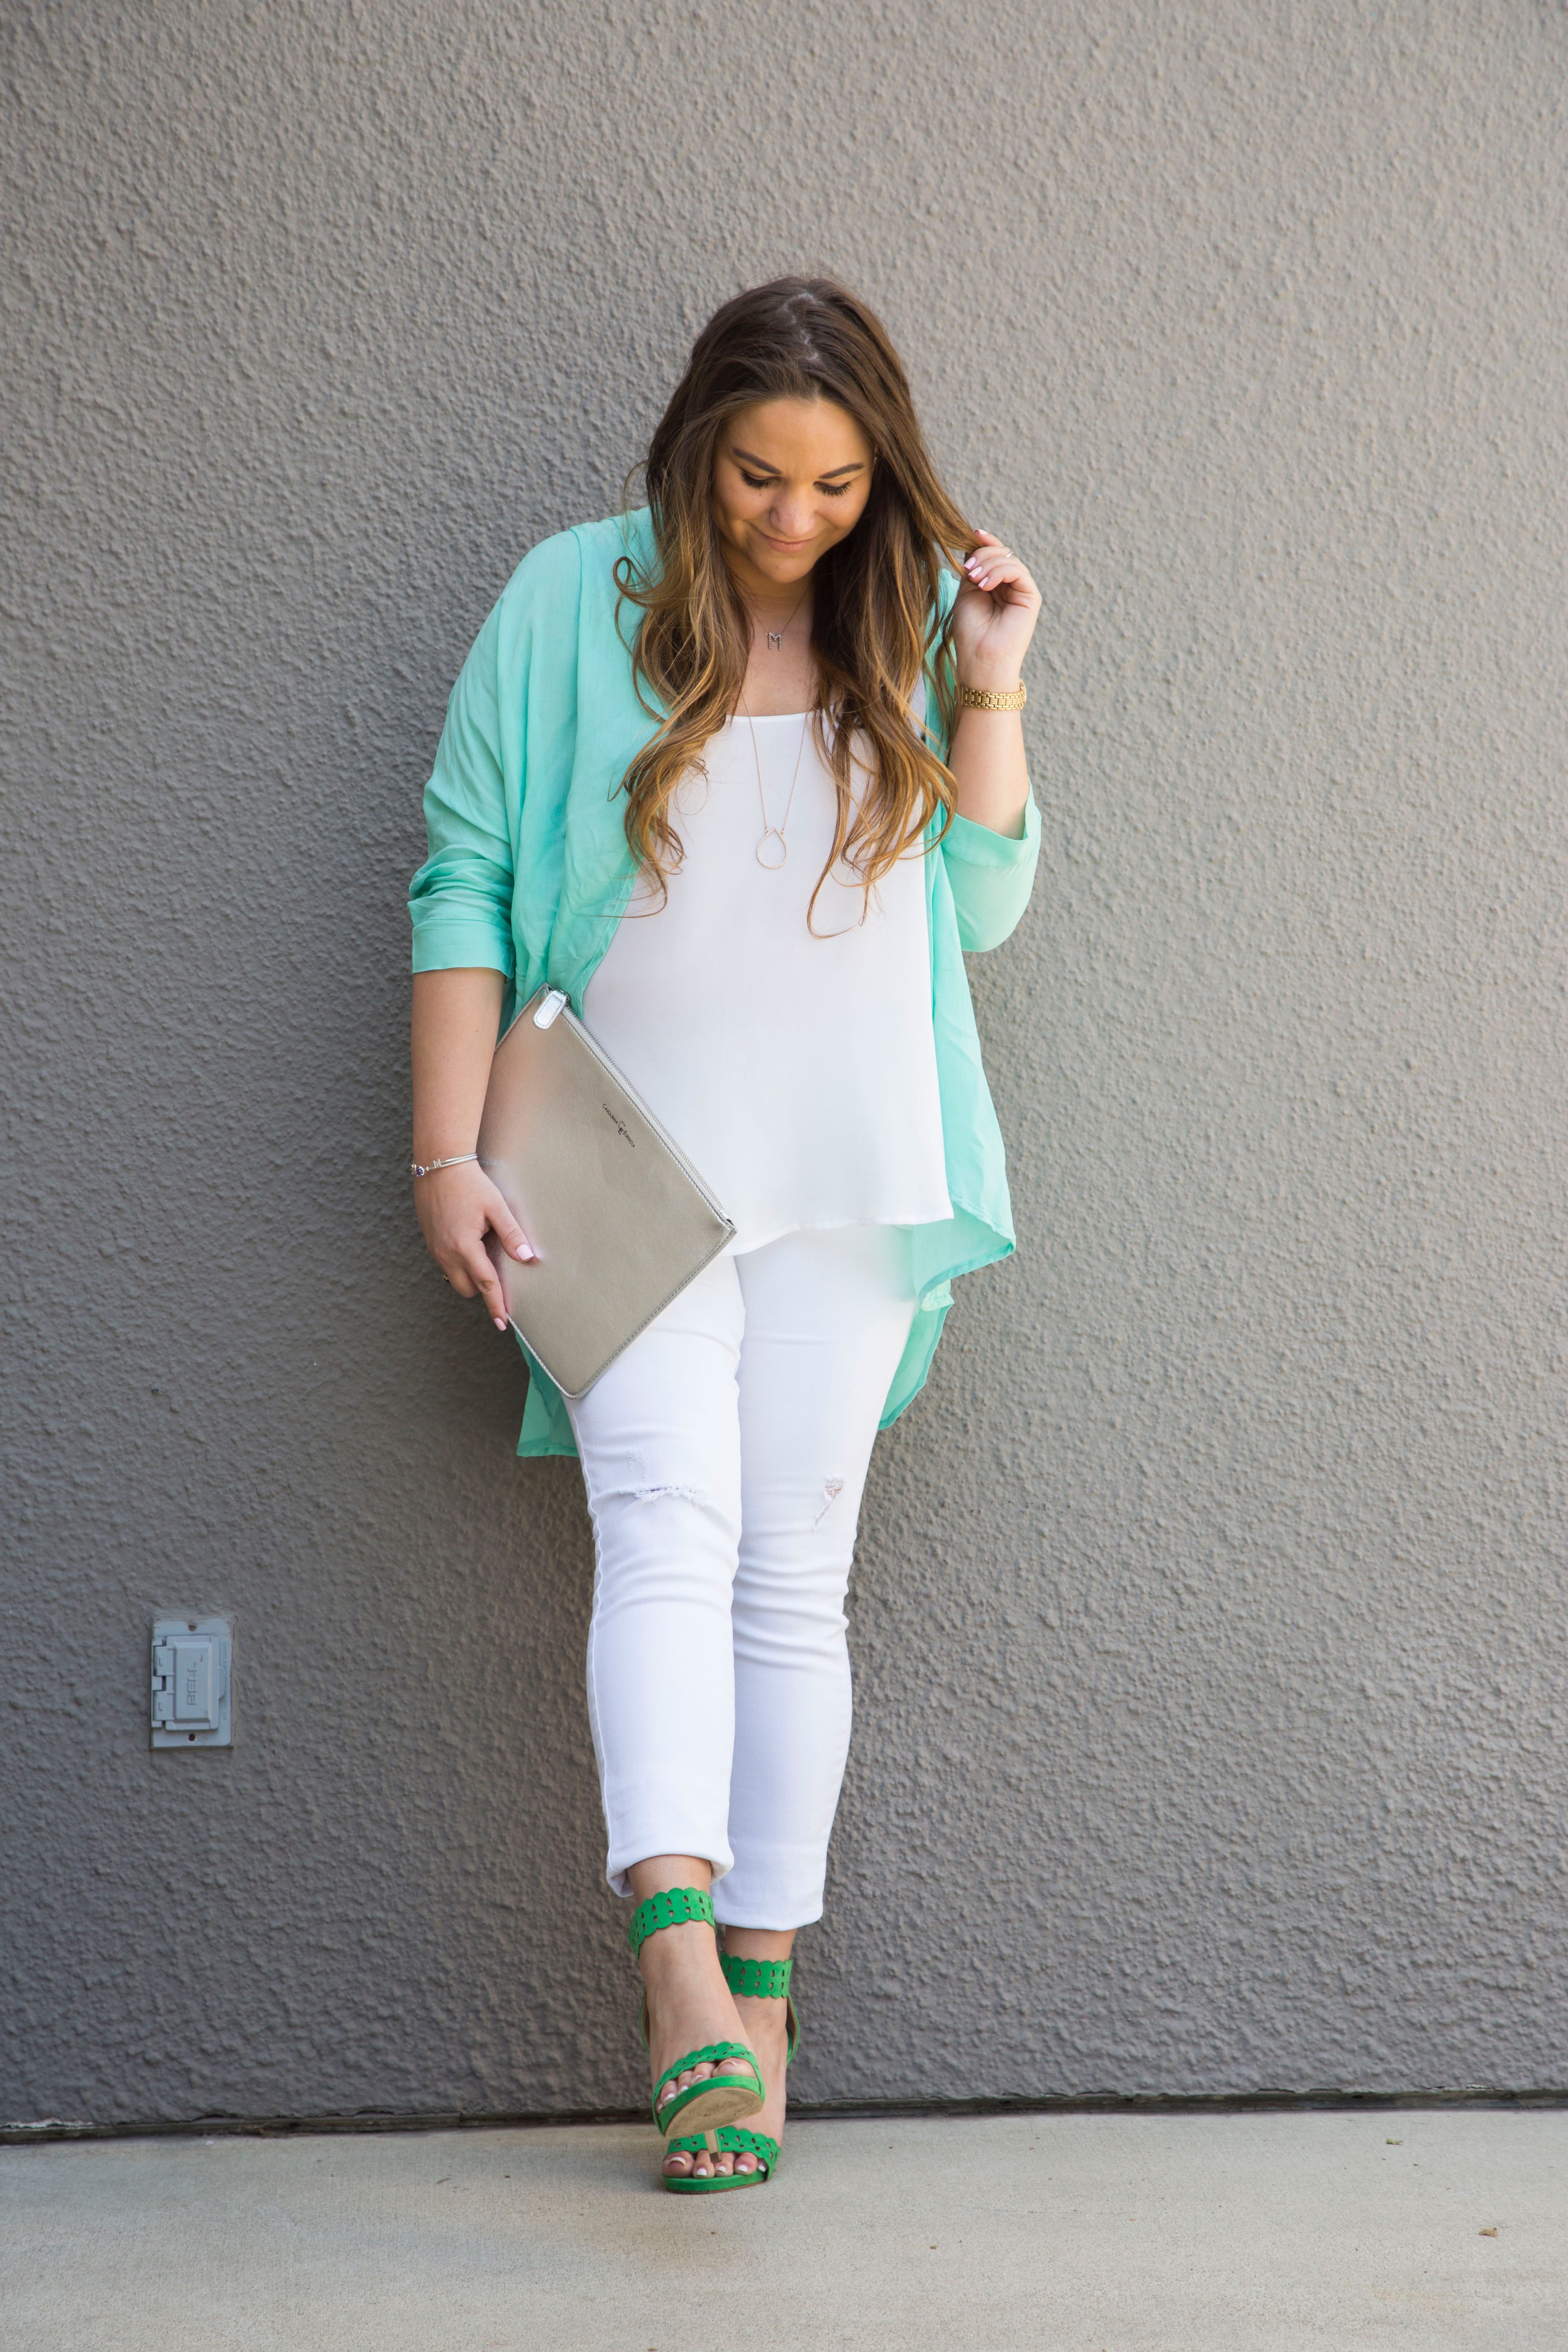 missyonmadison, melissa tierney, st pattys day, st patricks day, st patricks day outfit inspo, outfit inspo, fashion blog, fashion blogger, style blogger, style blog, green heels, green ankle strap sandals, metallic clutch, silver clutch, all for color, turqoise kimono, green kimono, white skinny jeans, old navy rockstar jeans, white chiffon camisole, apt 9 georgette camisole, kohls, old navy, green shoes, green sandals, hair goals, la blogger,